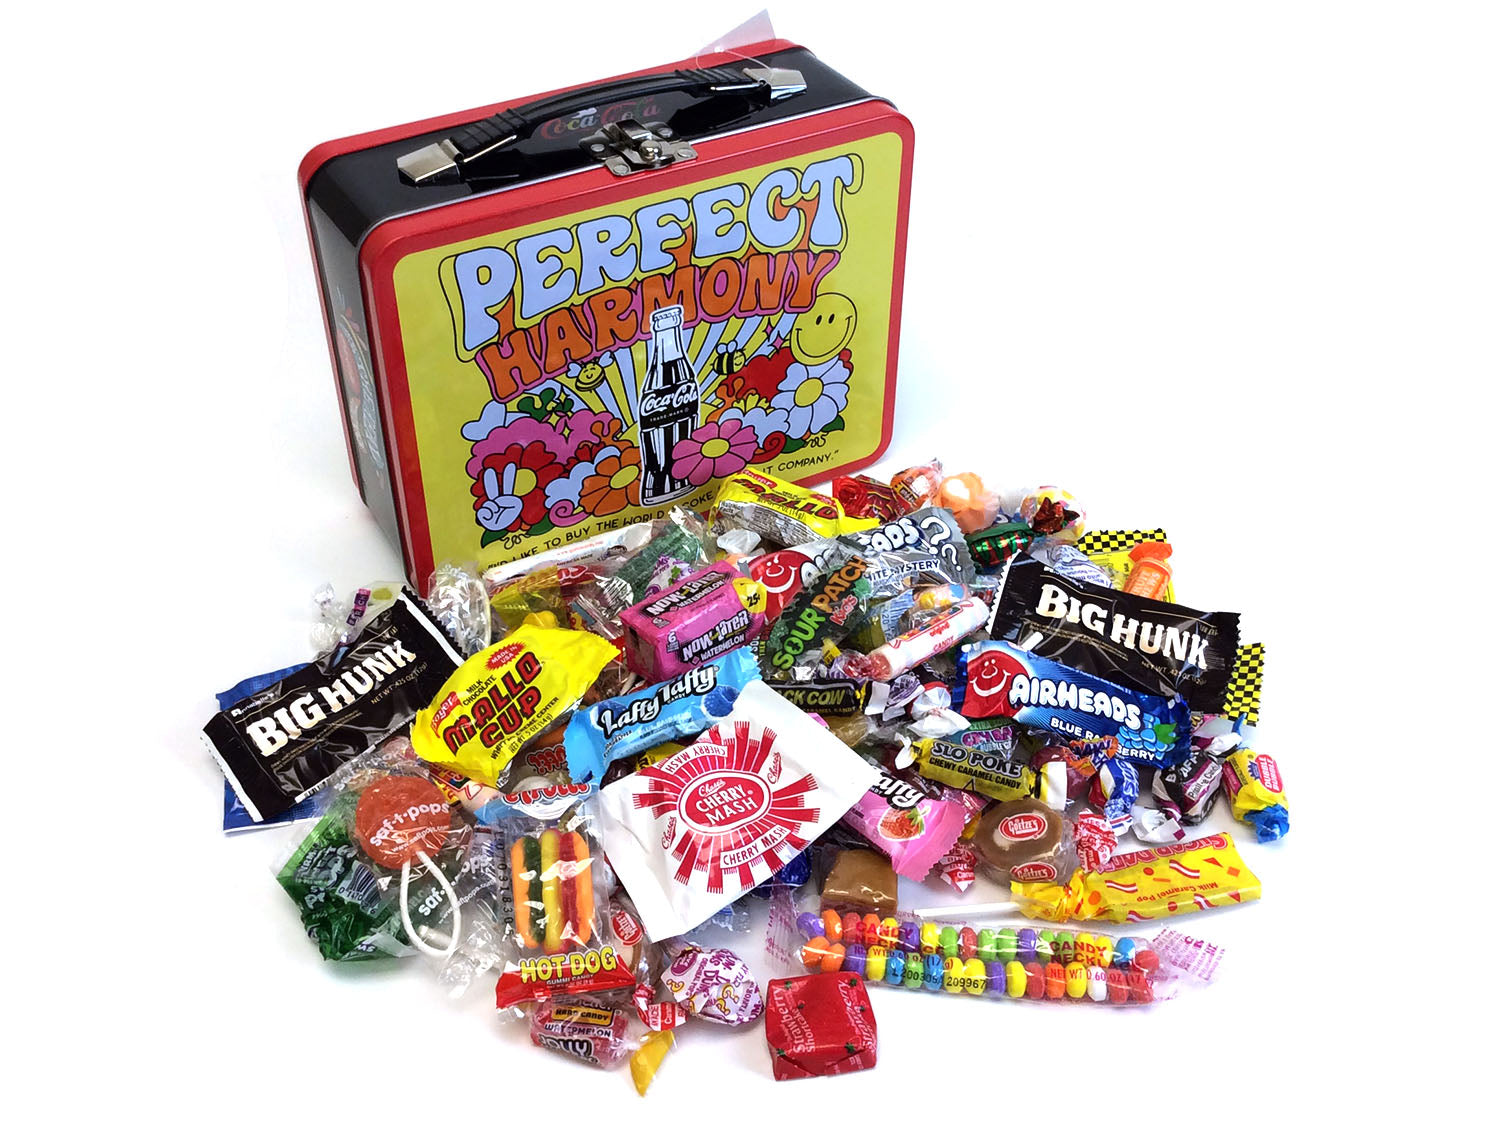 Lunch Box - Coca Cola Perfect Harmony - Penny Candy Assortment